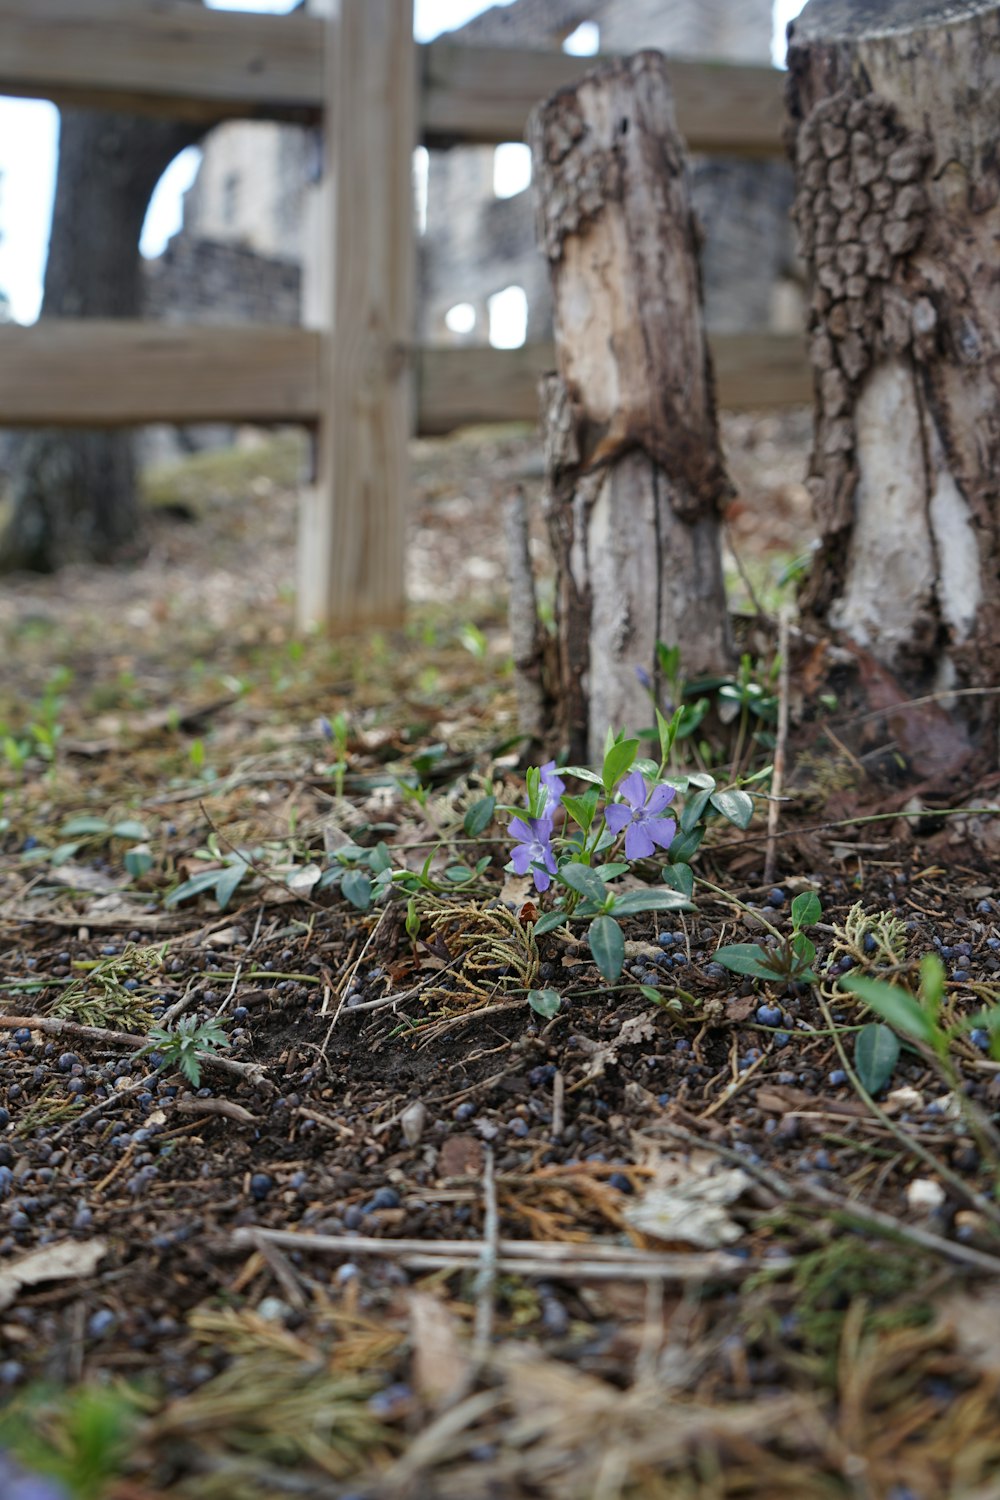 a small purple flower is growing in the dirt